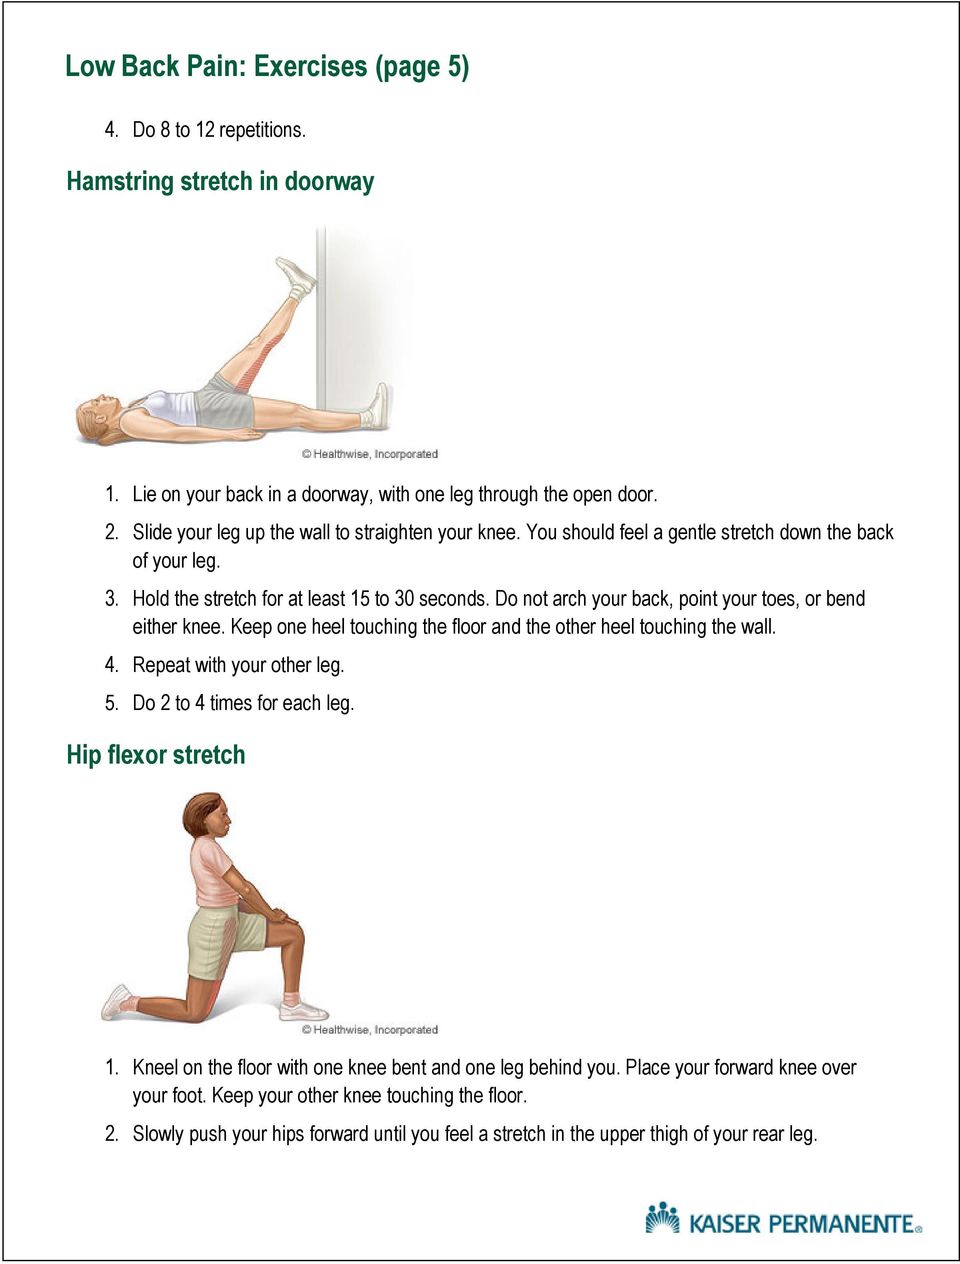 Do not arch your back, point your toes, or bend either knee. Keep one heel touching the floor and the other heel touching the wall. 4. Repeat with your other leg. 5. Do 2 to 4 times for each leg.